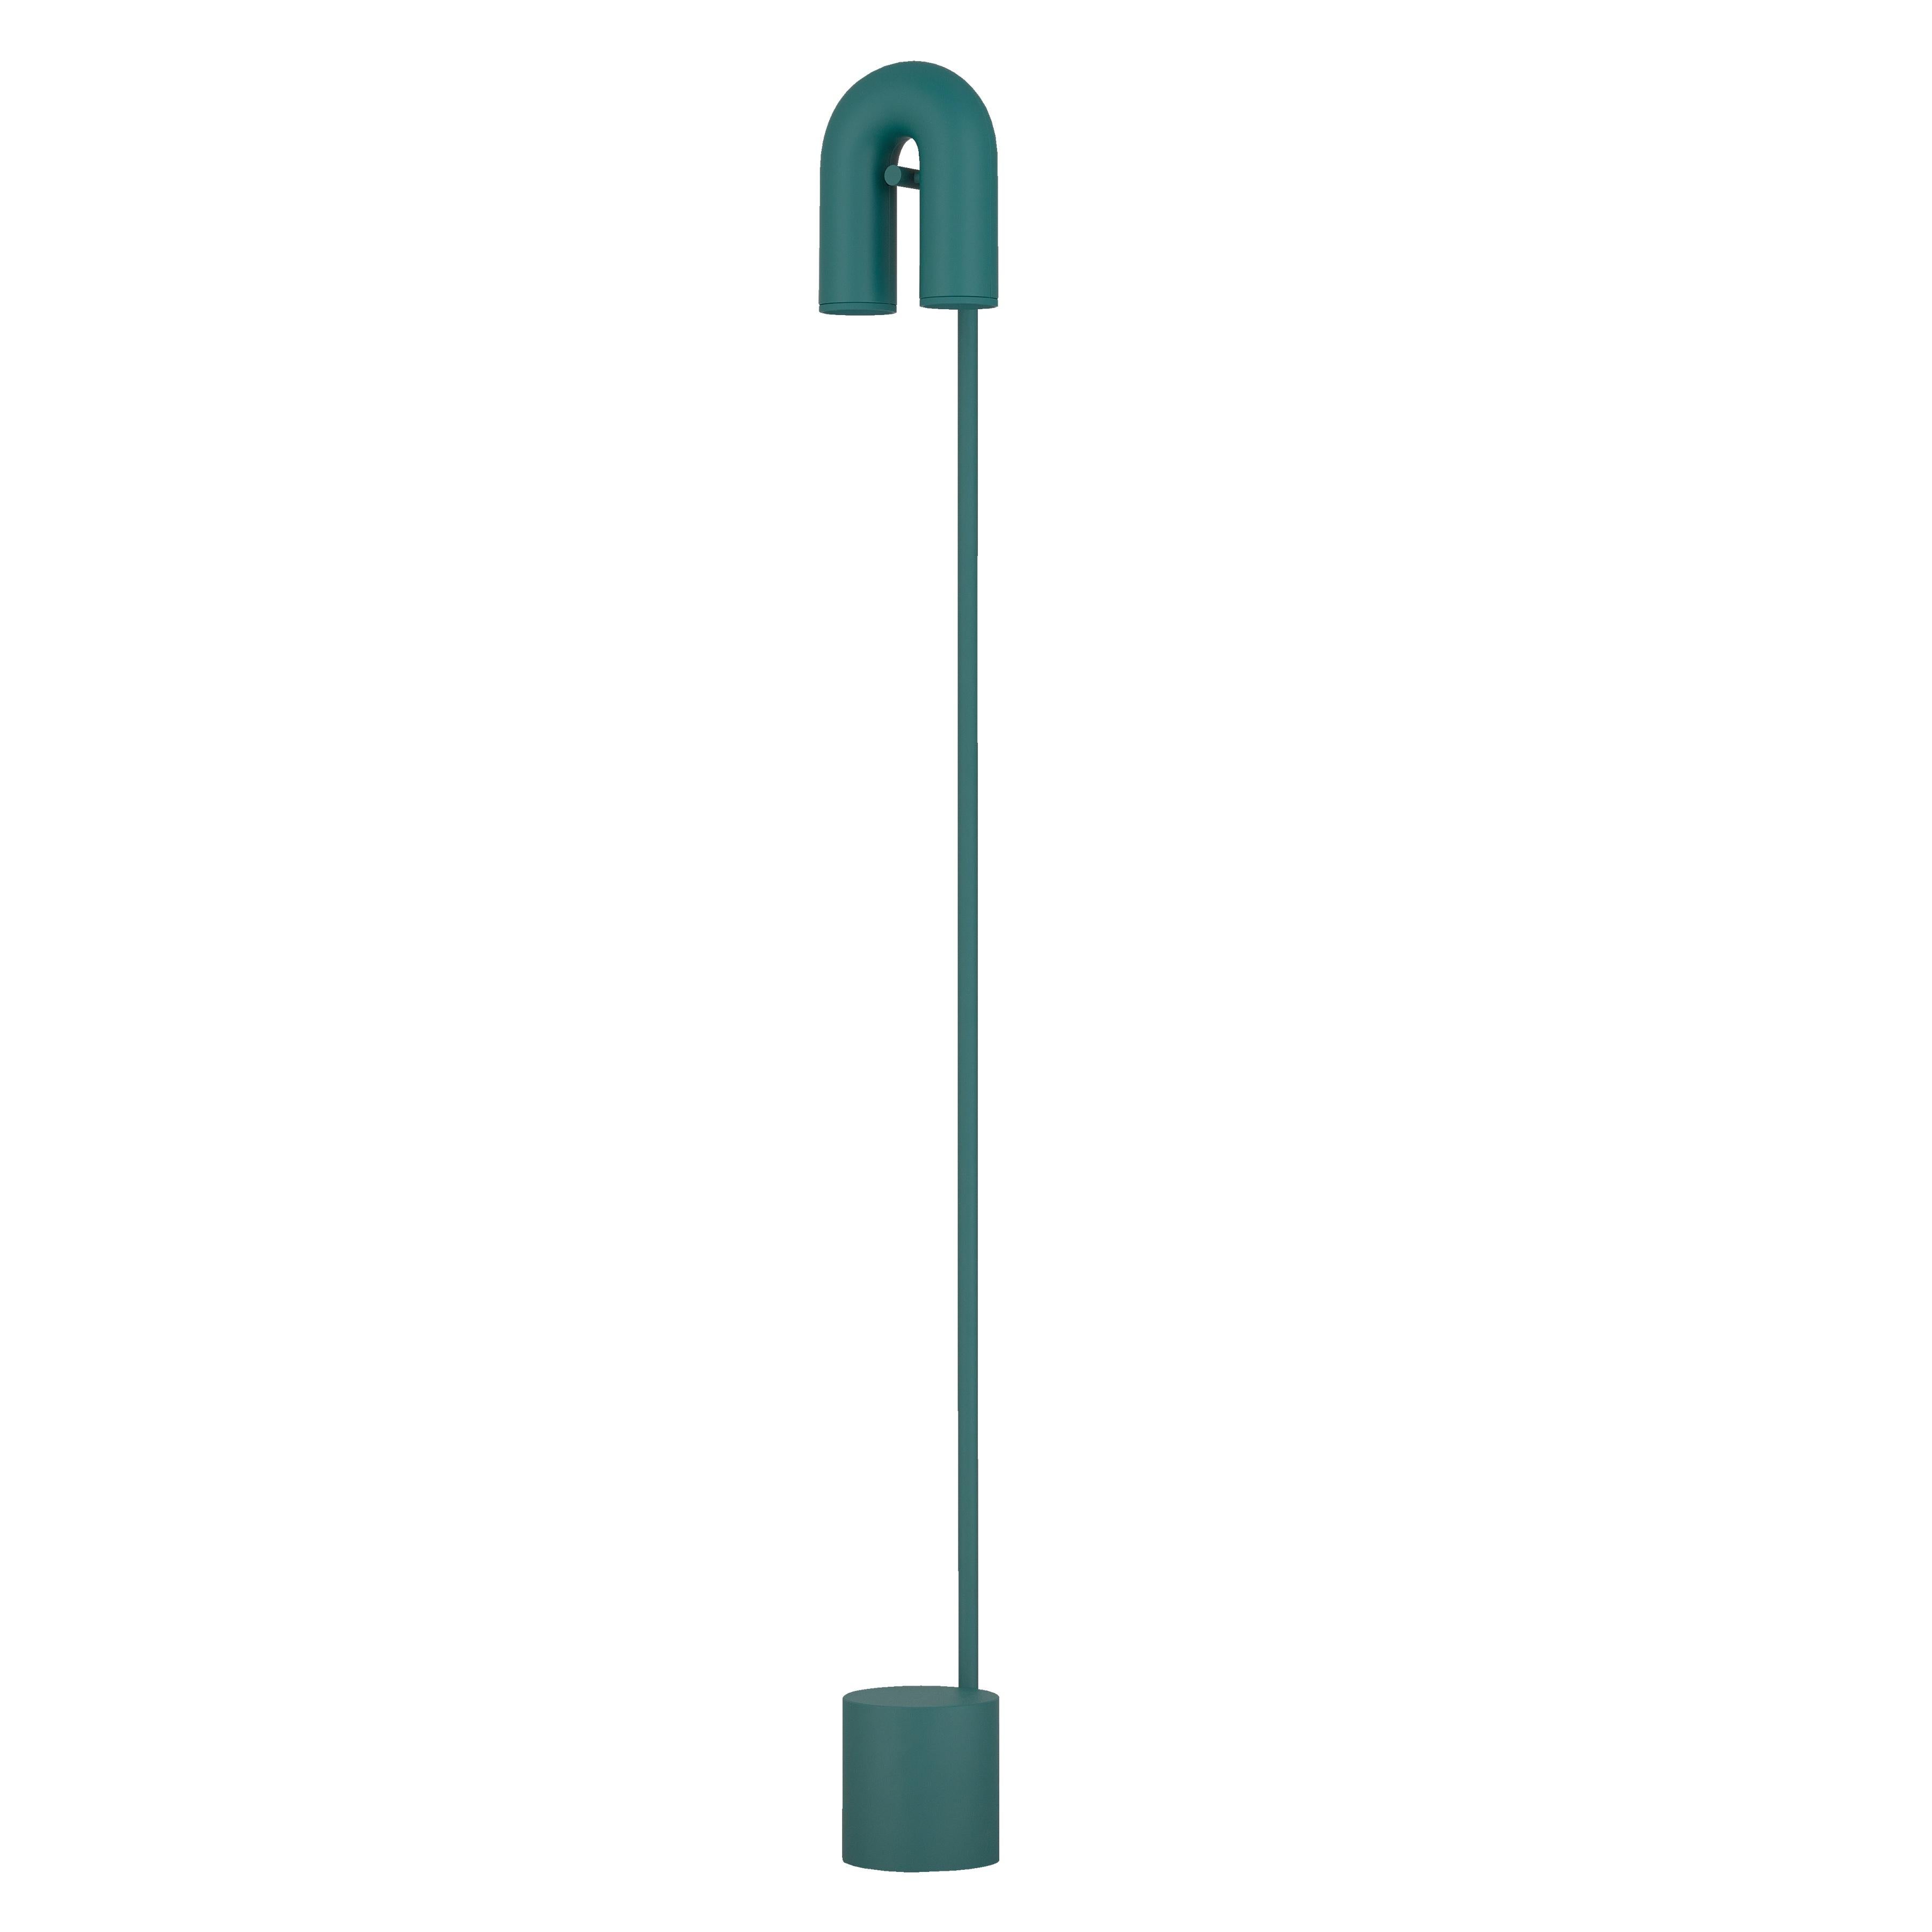 Cirkus floor lamps by AGO Lighting.
UL LISTED

Coated ABS, aluminum, steel.
LED GU10 max 6W x 2, 110-230V.

Four colors available: Green, charcoal, grey, terracotta.
Dimensions: H 130.5 cm x W 11.5 cm.

The Cirkus floor lamps complete the collection